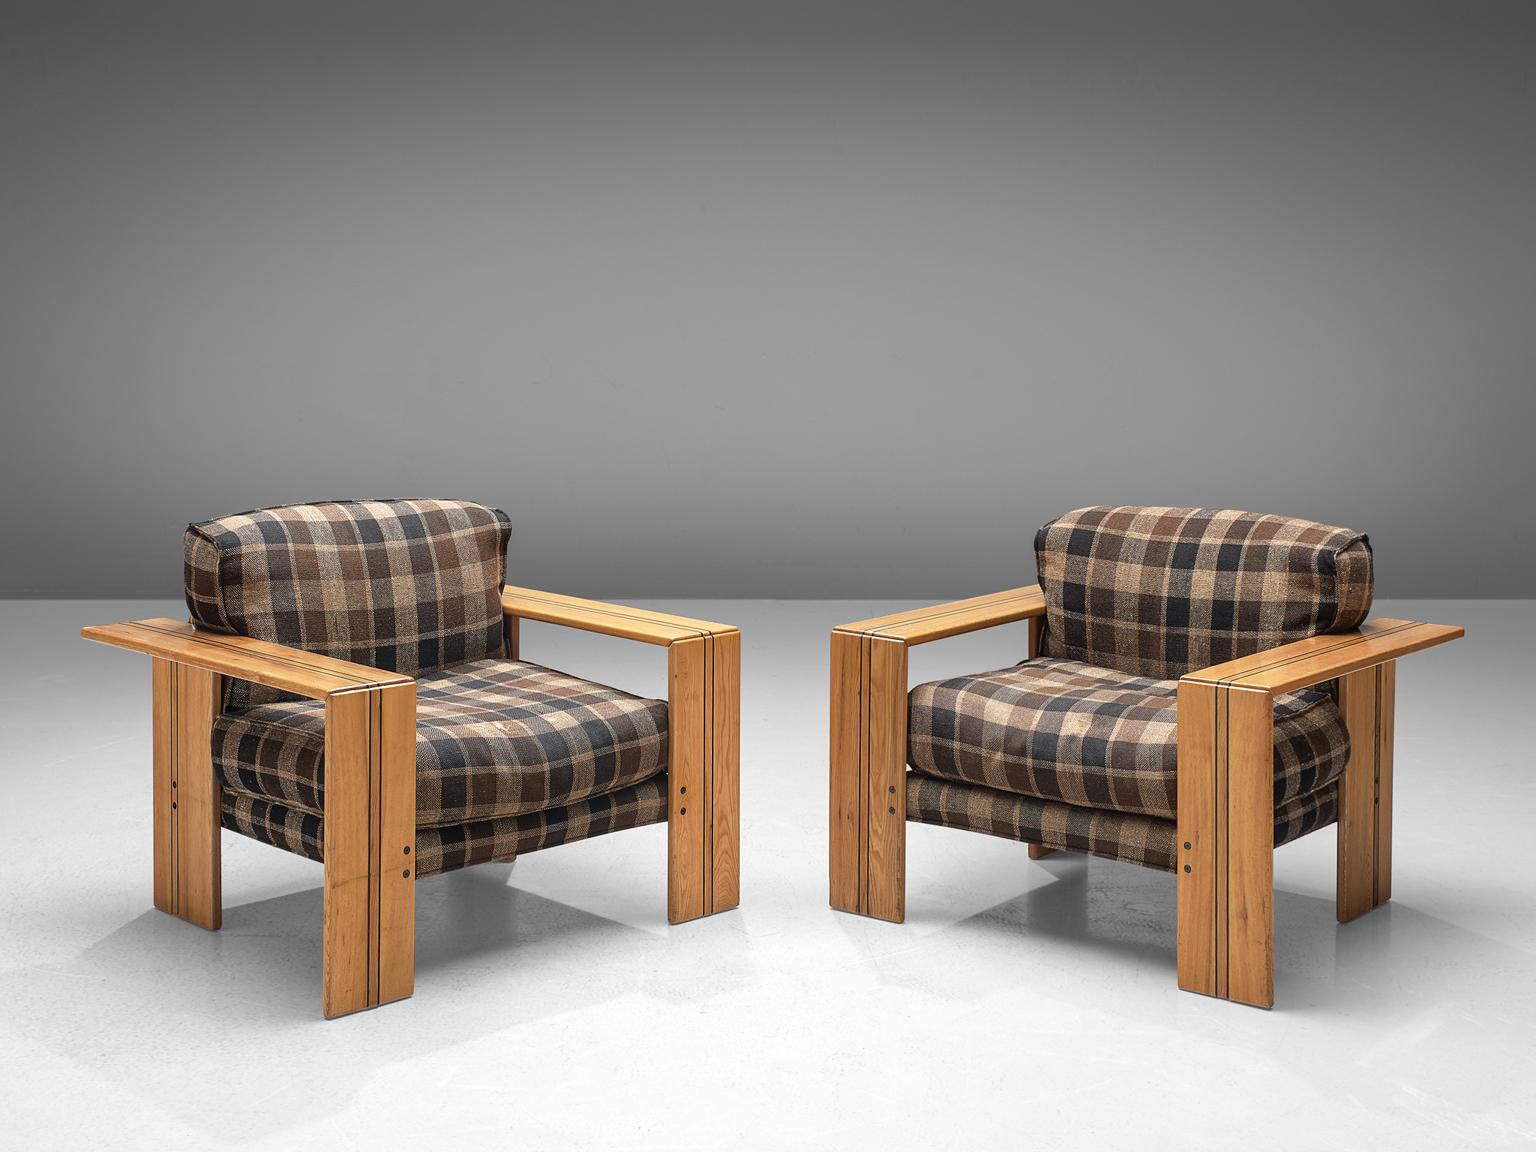 Afra & Tobia Scarpa for Maxalto, set of two 'Artona' armchairs, walnut and brown-blue checkered fabric, Italy 1975.

Pair of cubic Artona lounge chairs by Italian designer couple Afra and Tobia Scarpa. The Artona line by the Scarpa duo was in fact